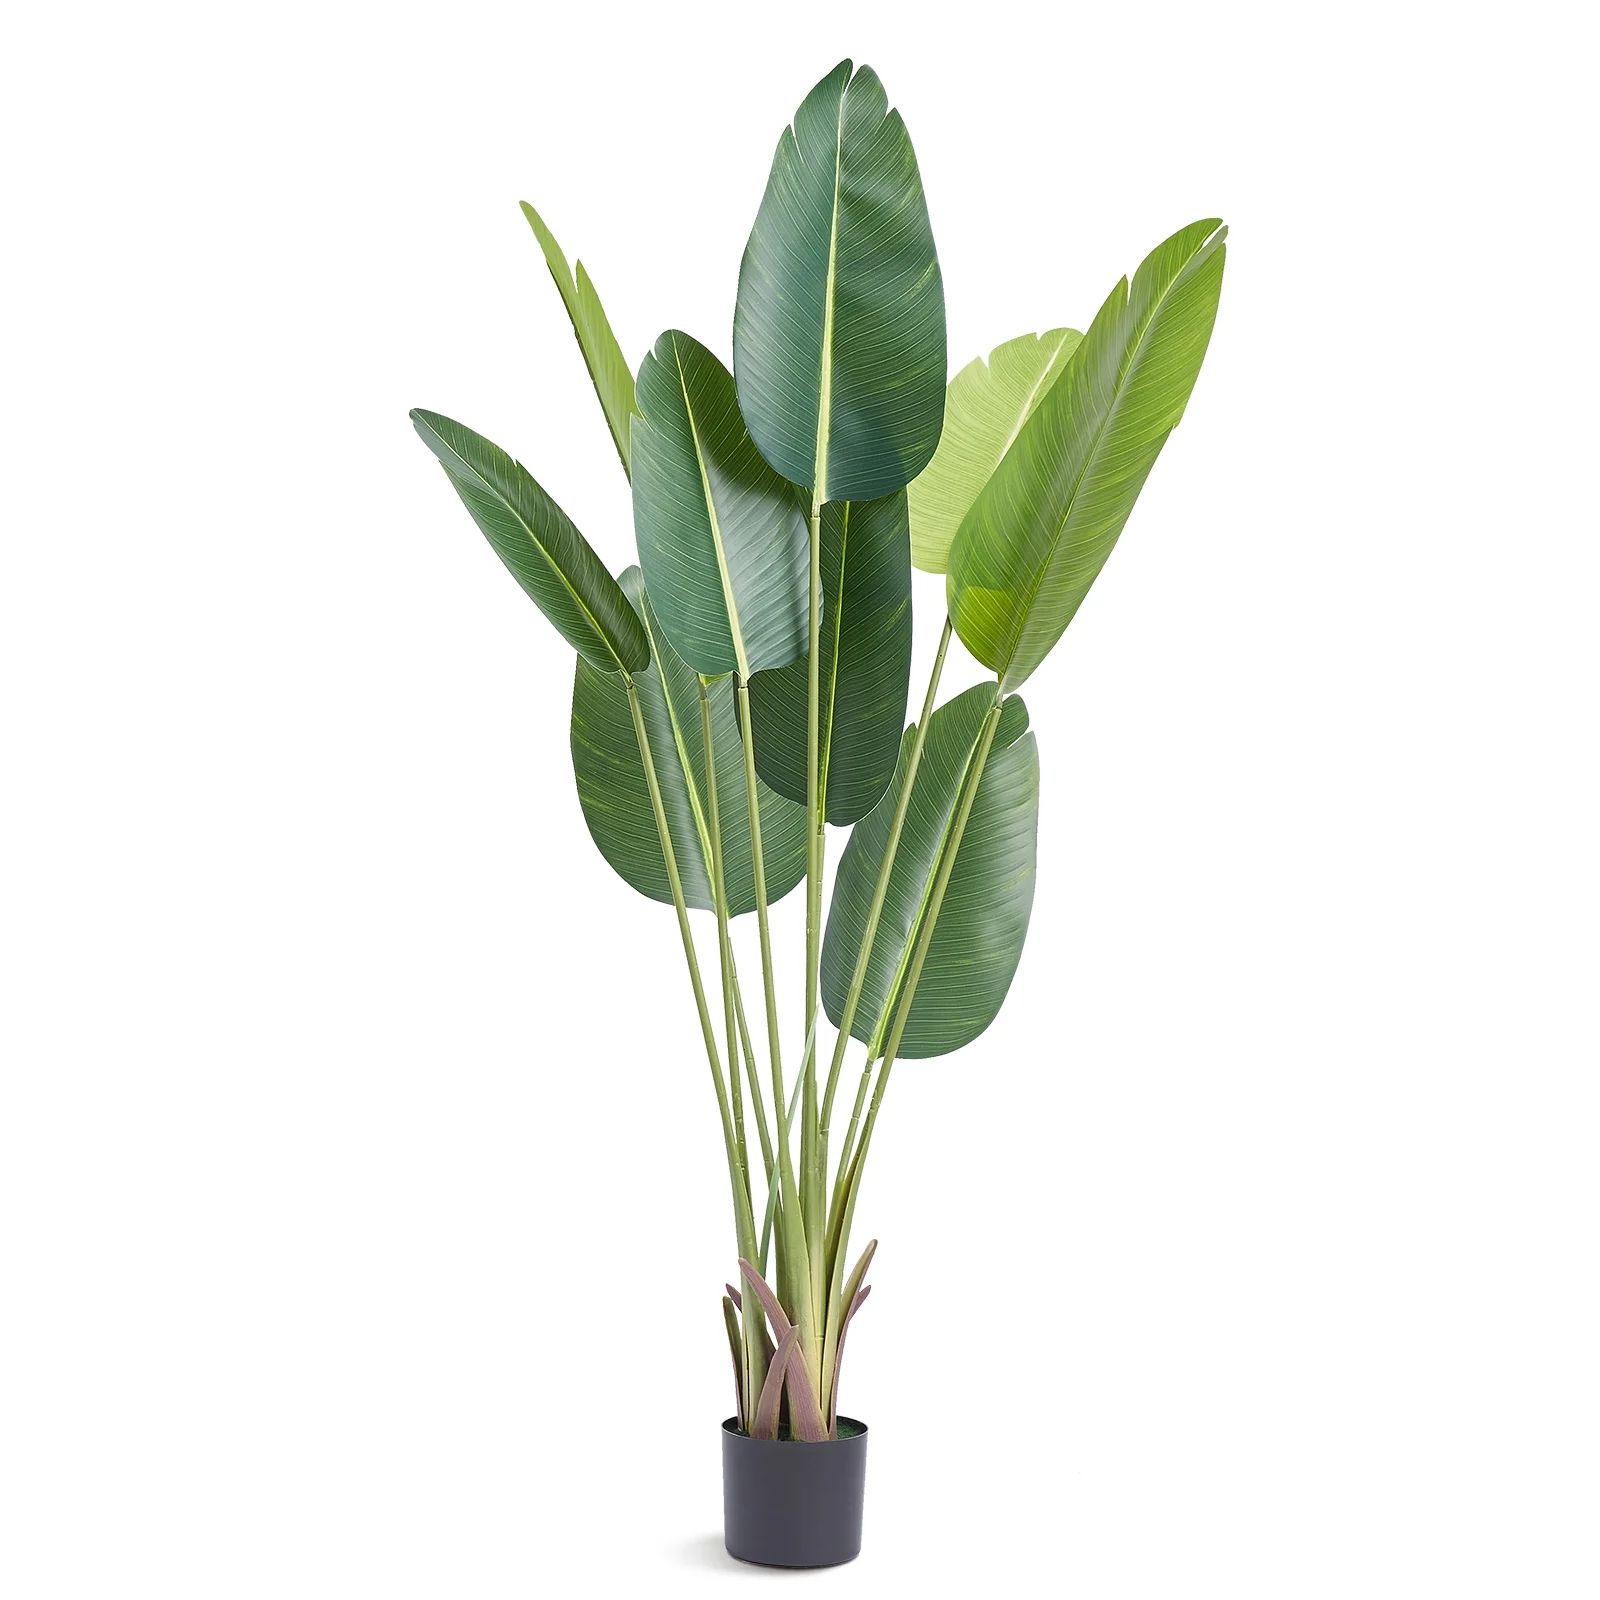 BENTISM 5 ft Artificial Birds Of Paradise Plant, Green Faux Lifelike Fake Plant for Office Home L... | Walmart (US)